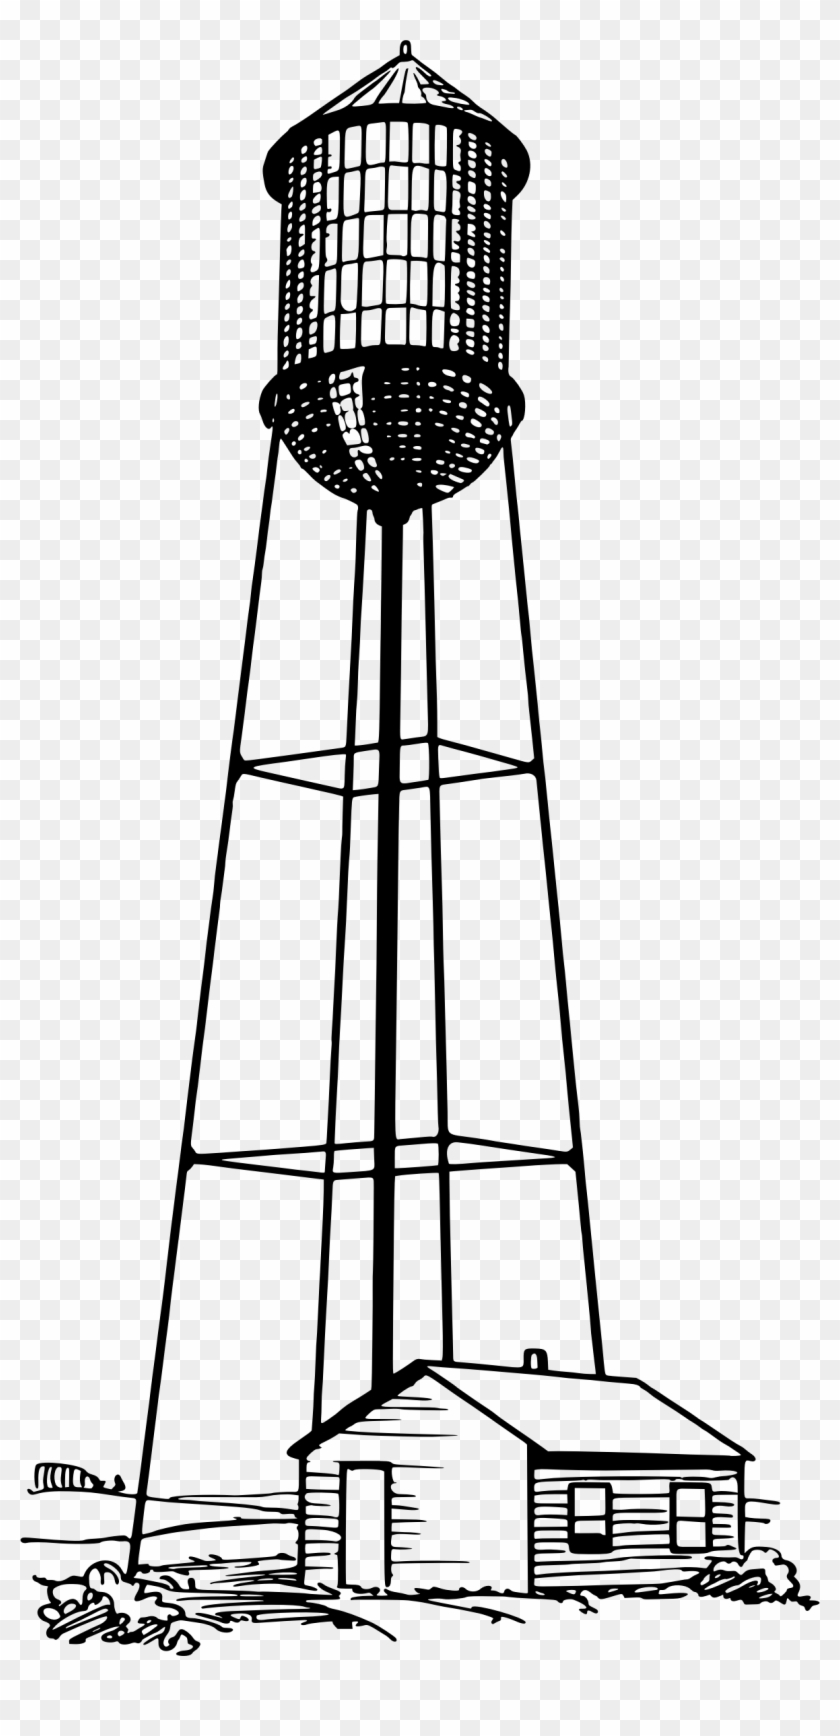 Tall Water Tower Vector Clipart Clipart Of A Water - Water Tower Vs Reservoir #1145955